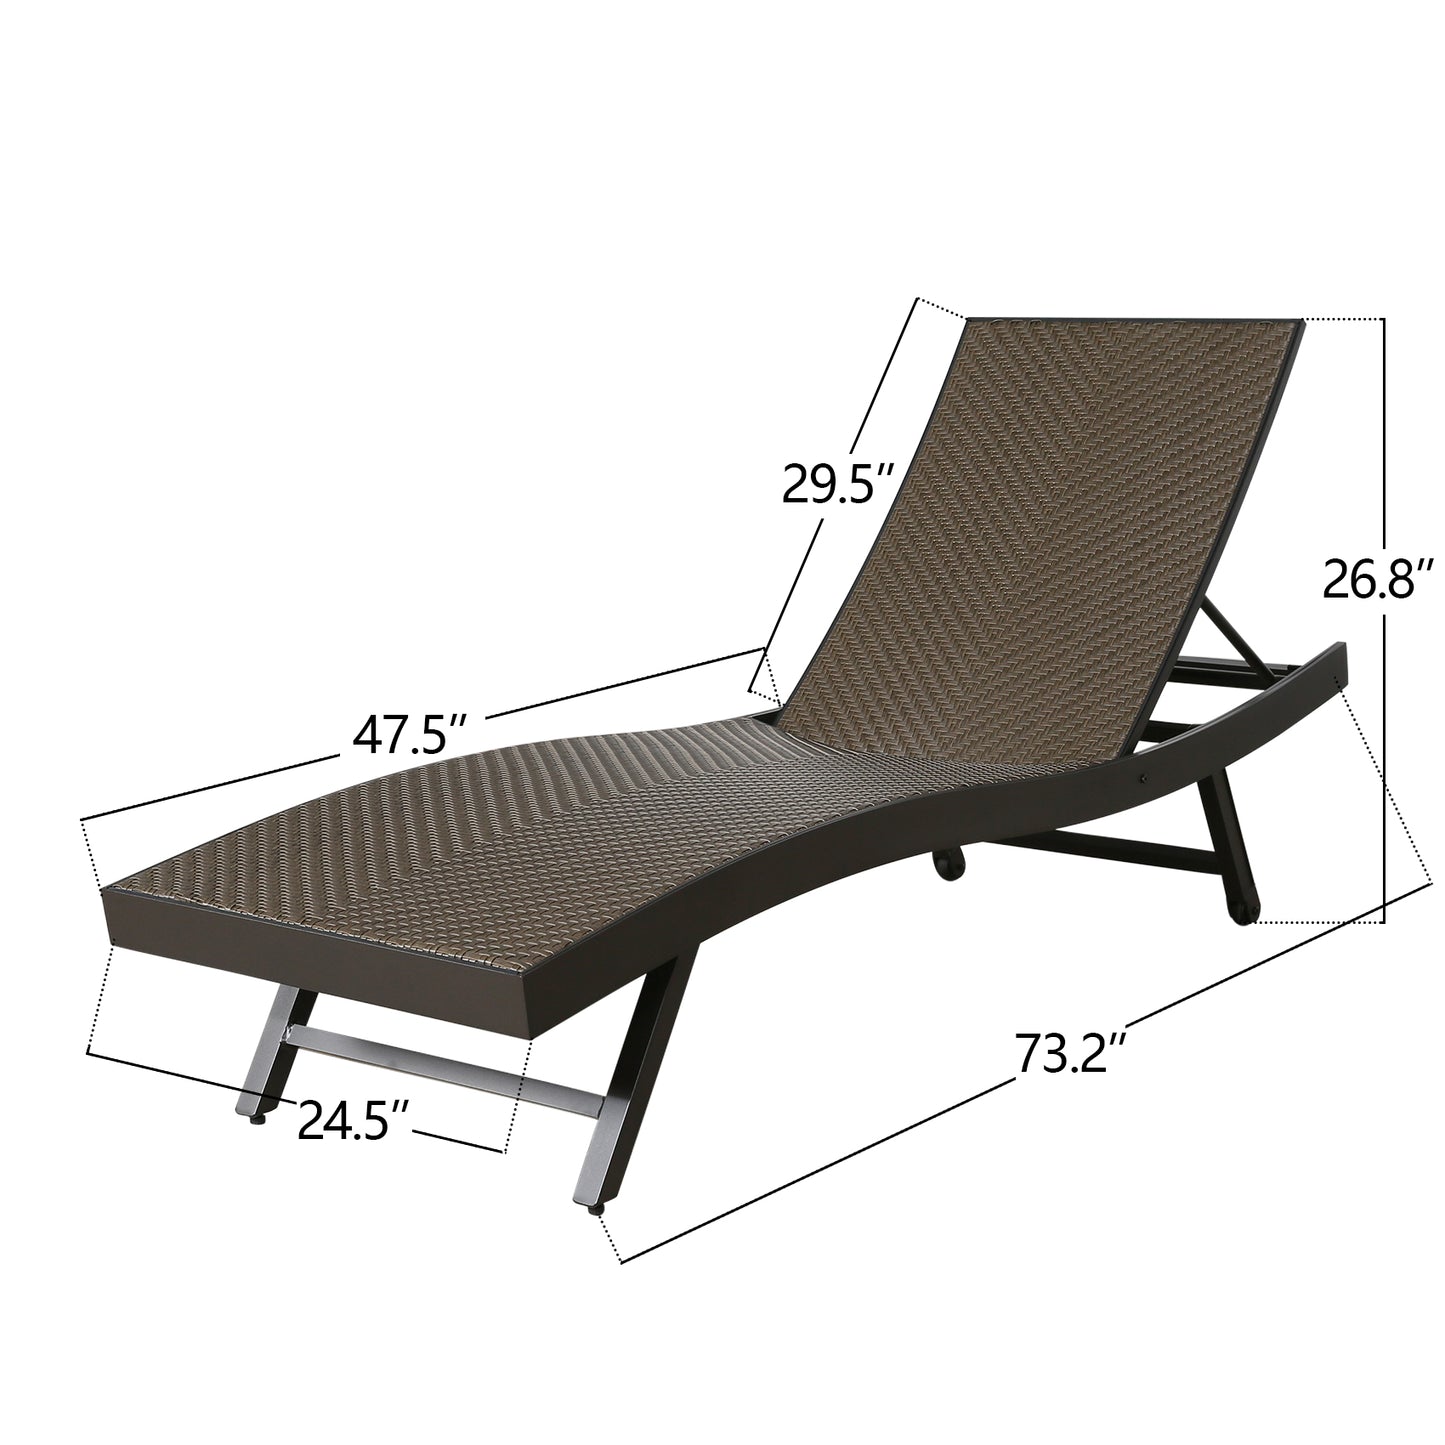 Outdoor Wicker Chaise Lounge Patio Adjustable Reclining Chaise Lounge Chair with Wheels (1 Pack)